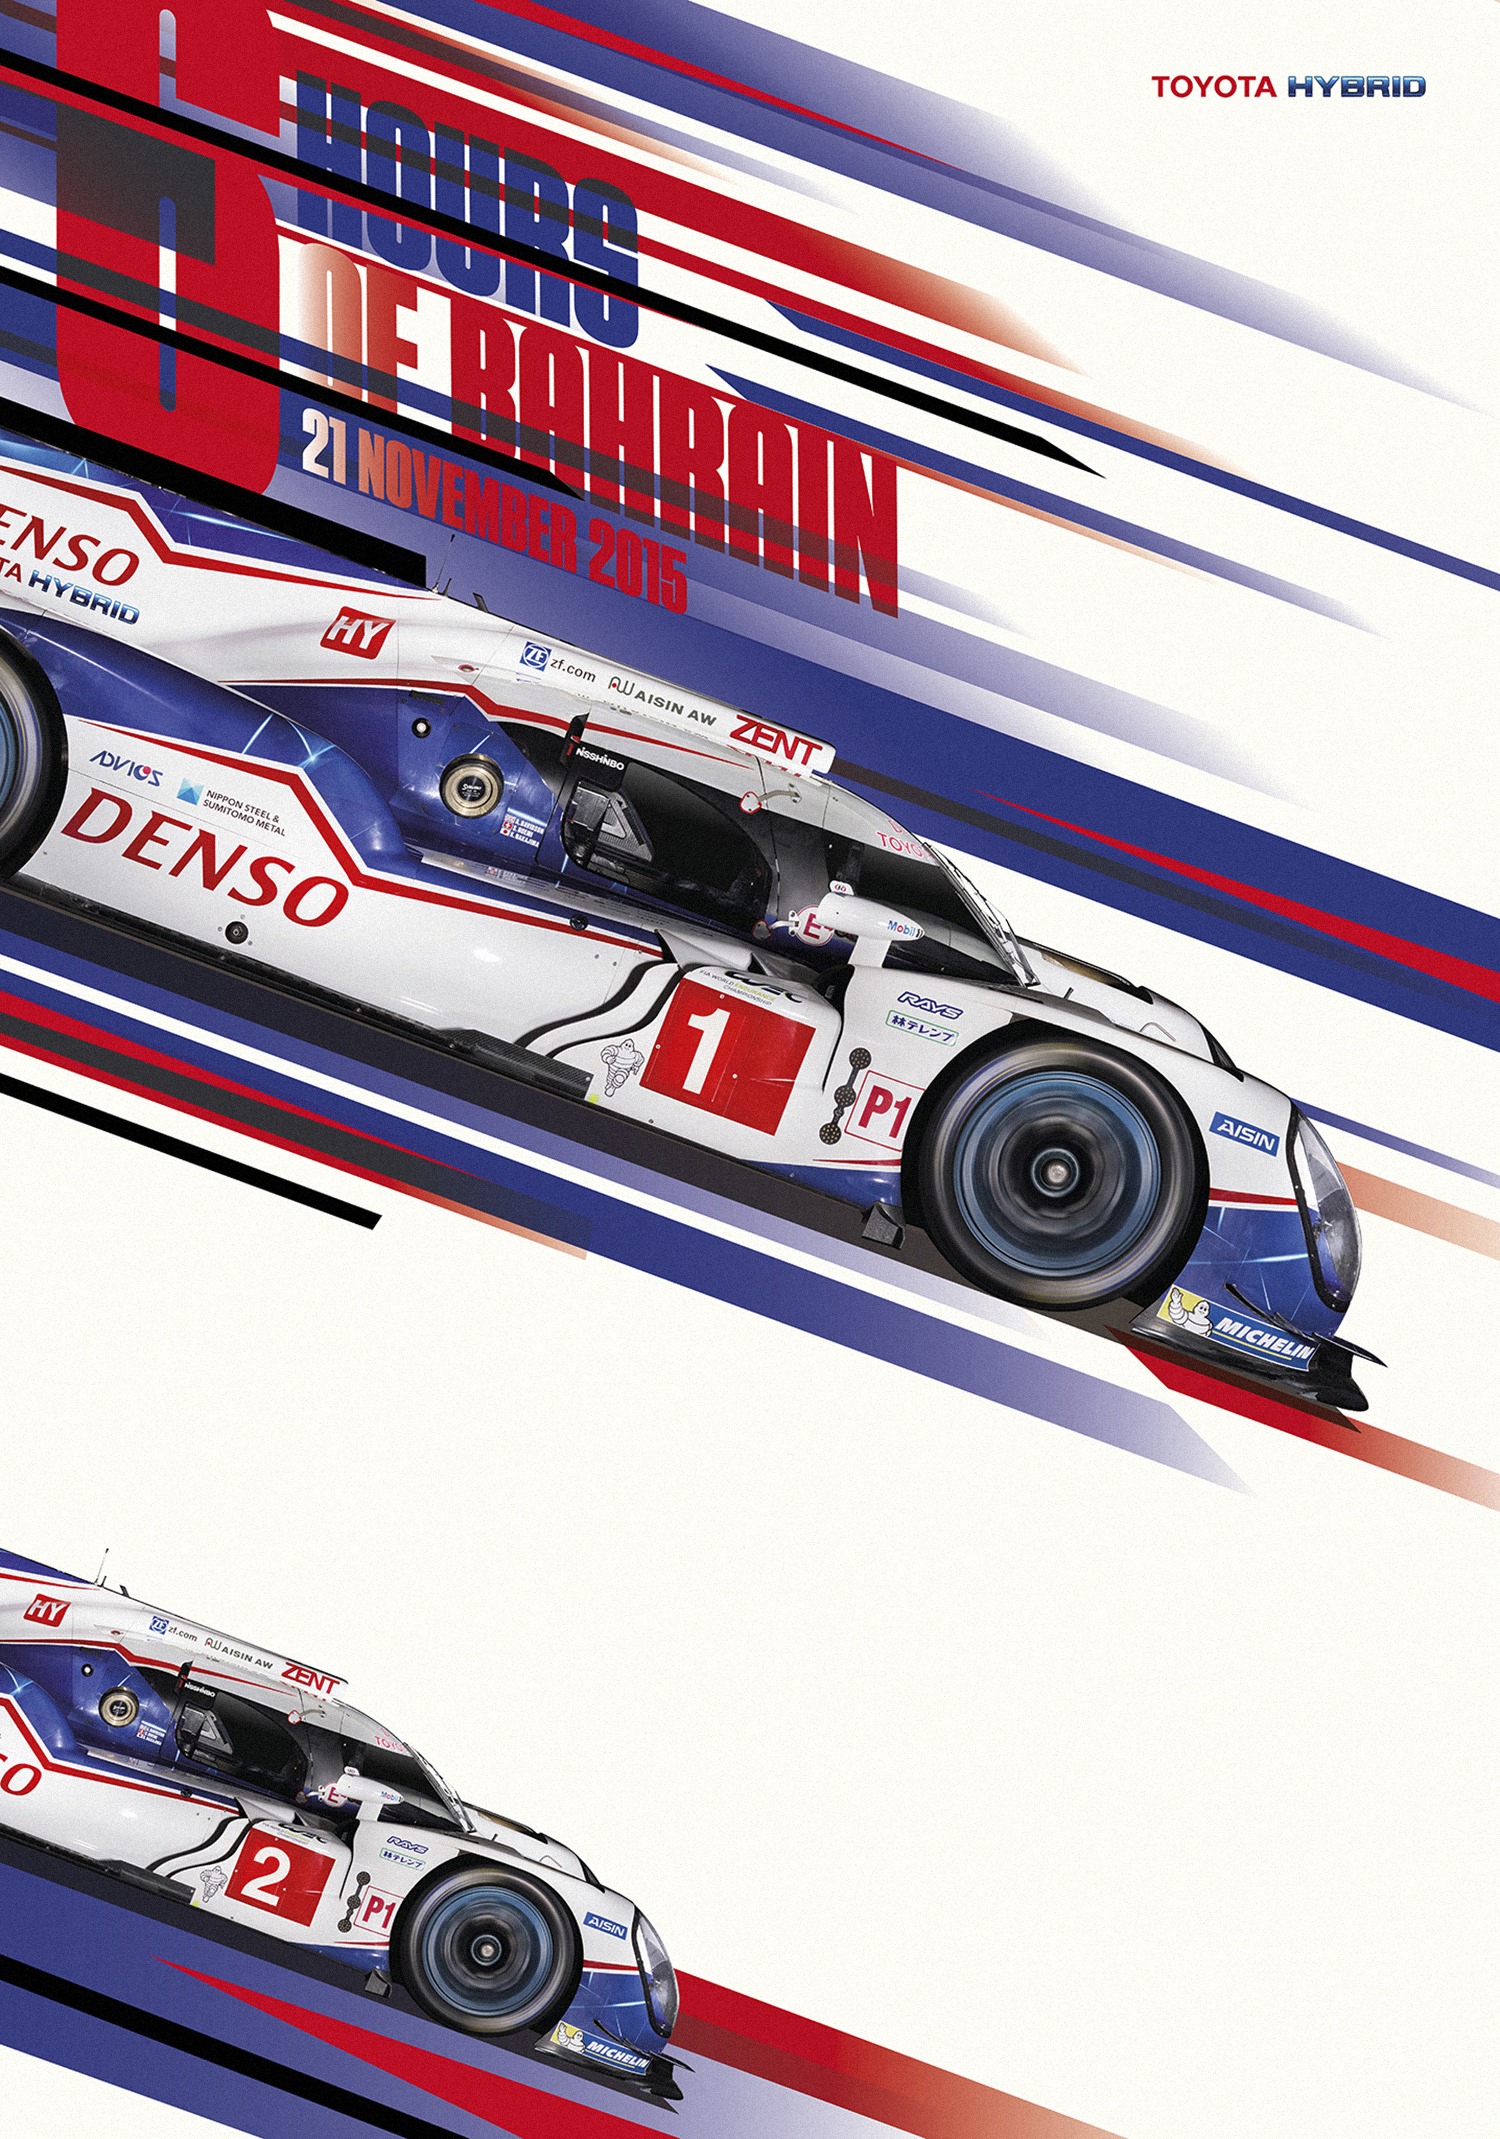 Toyota. WEC Racing Posters. 5